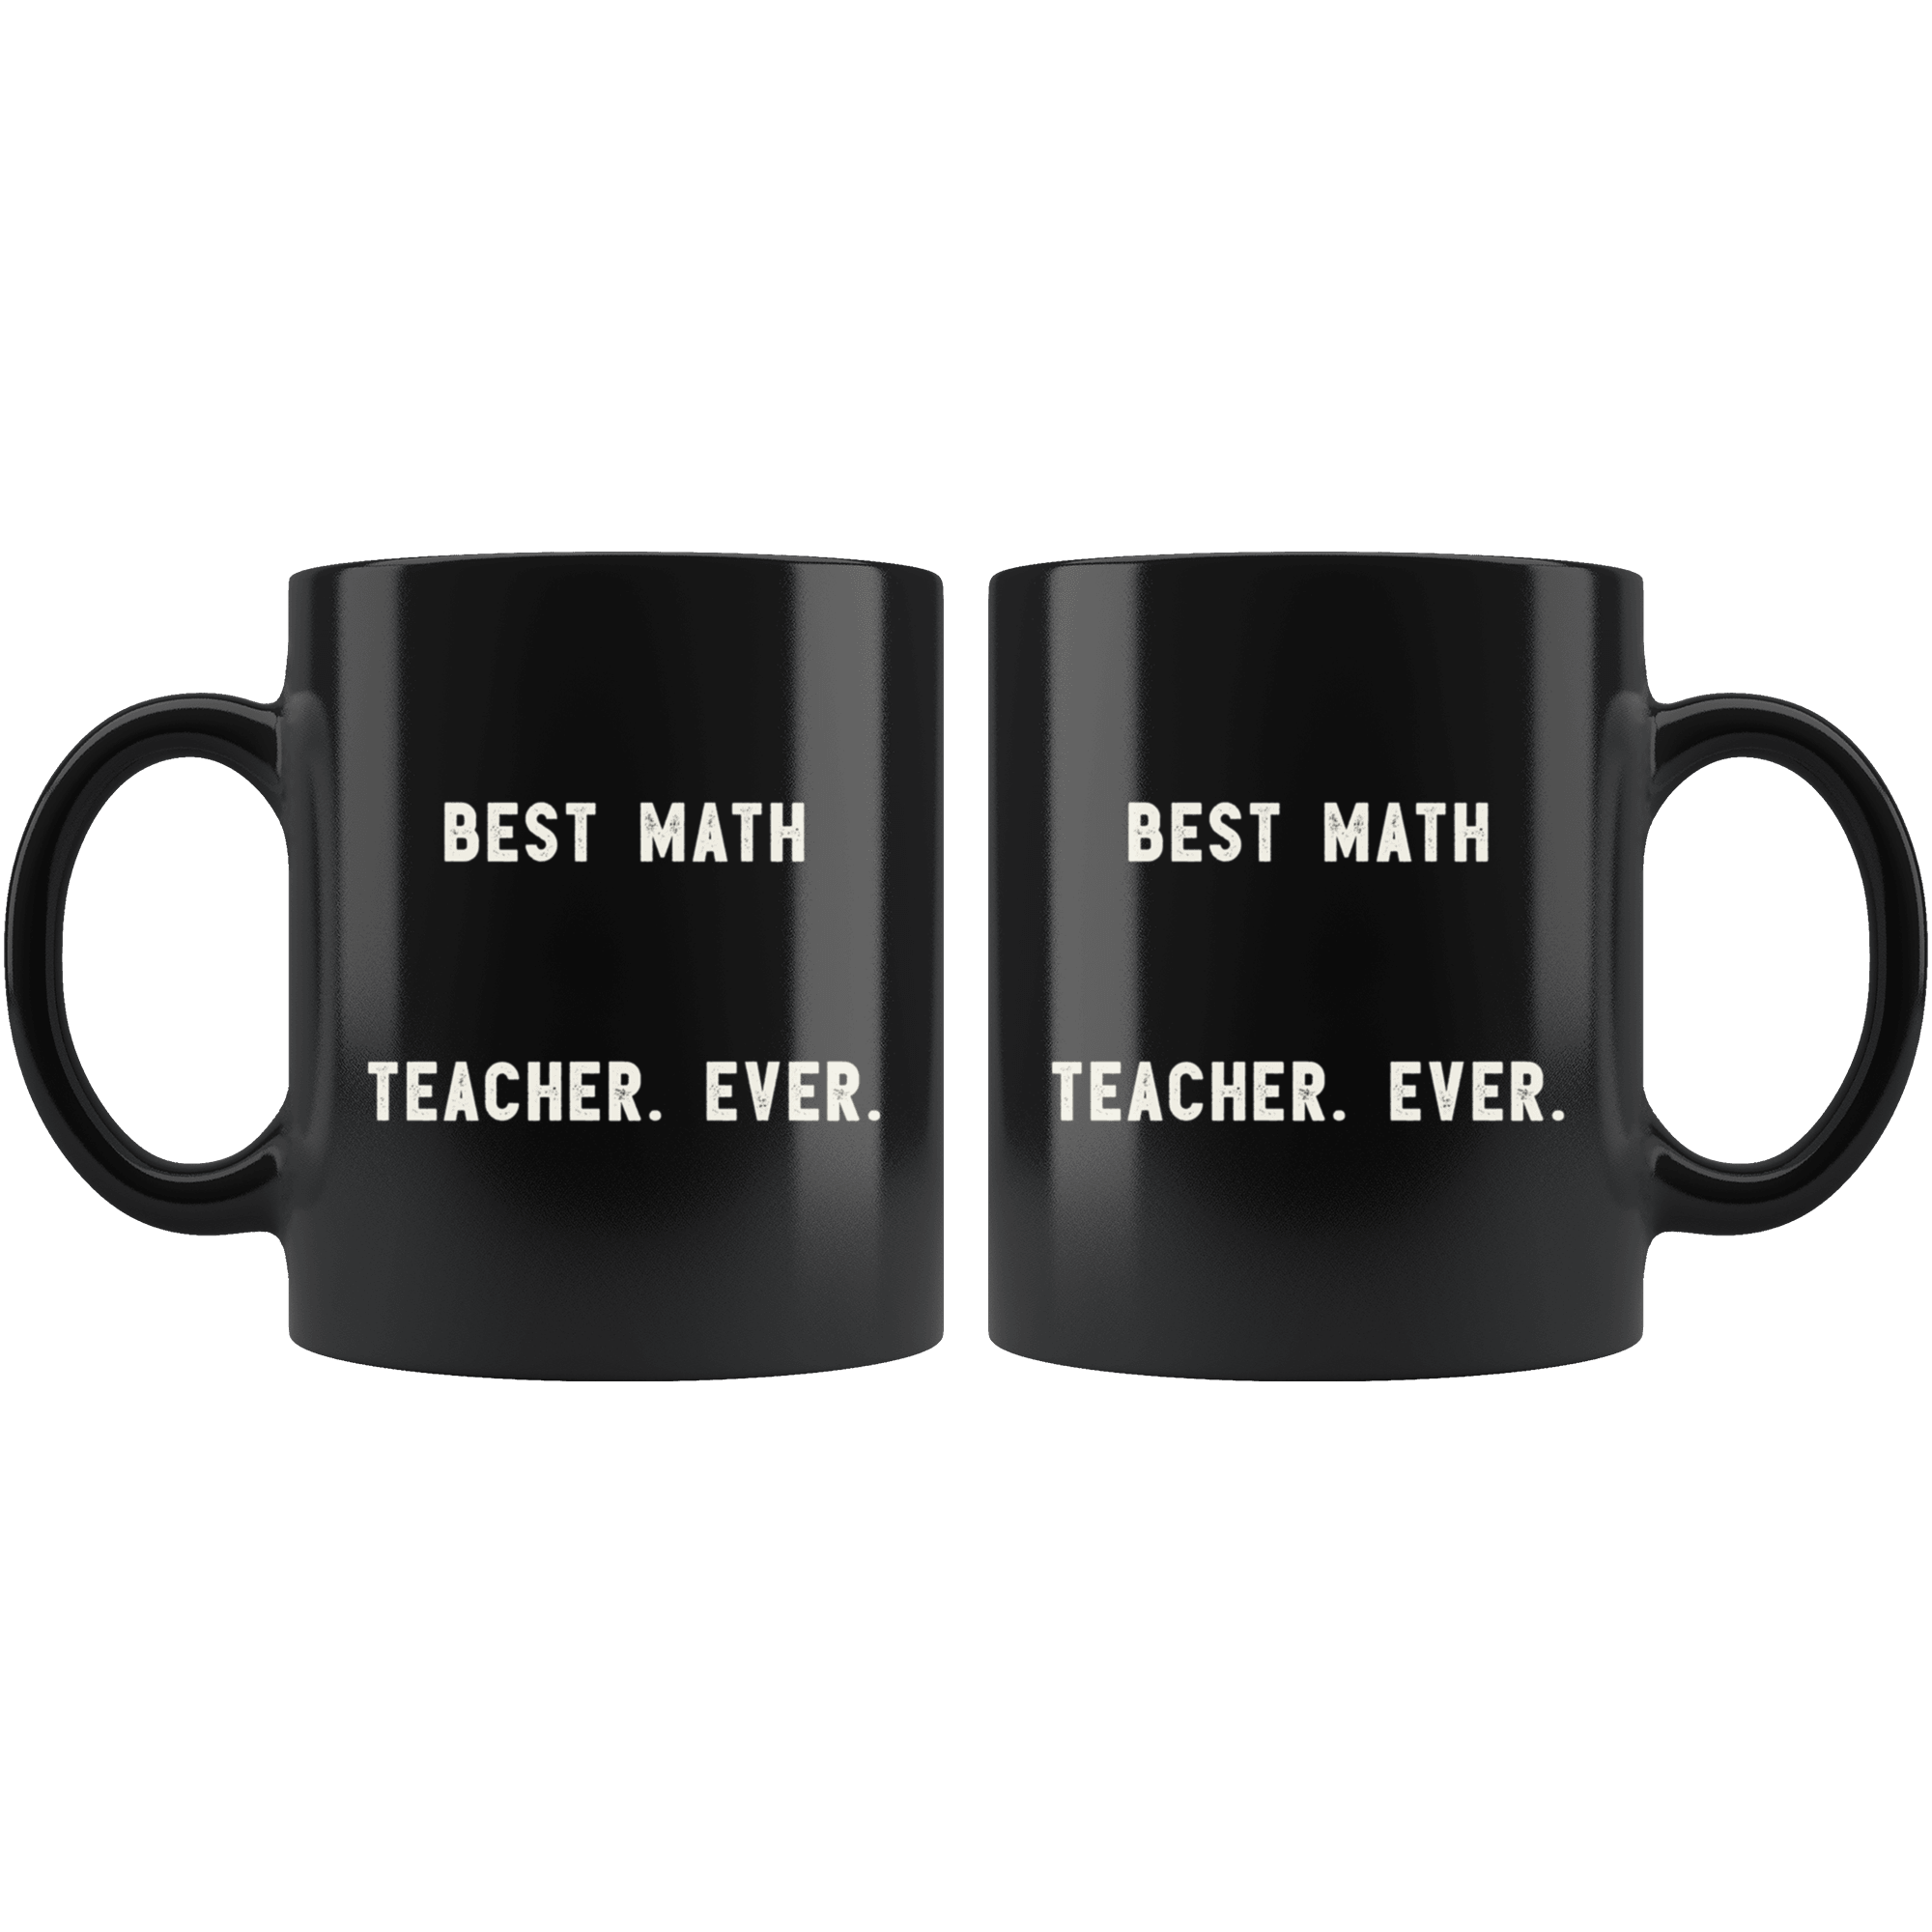 Buy RADANYA Funny Mug -Math Teacher Mug - Beautiful Dance Moves - Math  Themed Gifts | Math Related Gifts for School Friends (11oz) Online at Low  Prices in India - Amazon.in